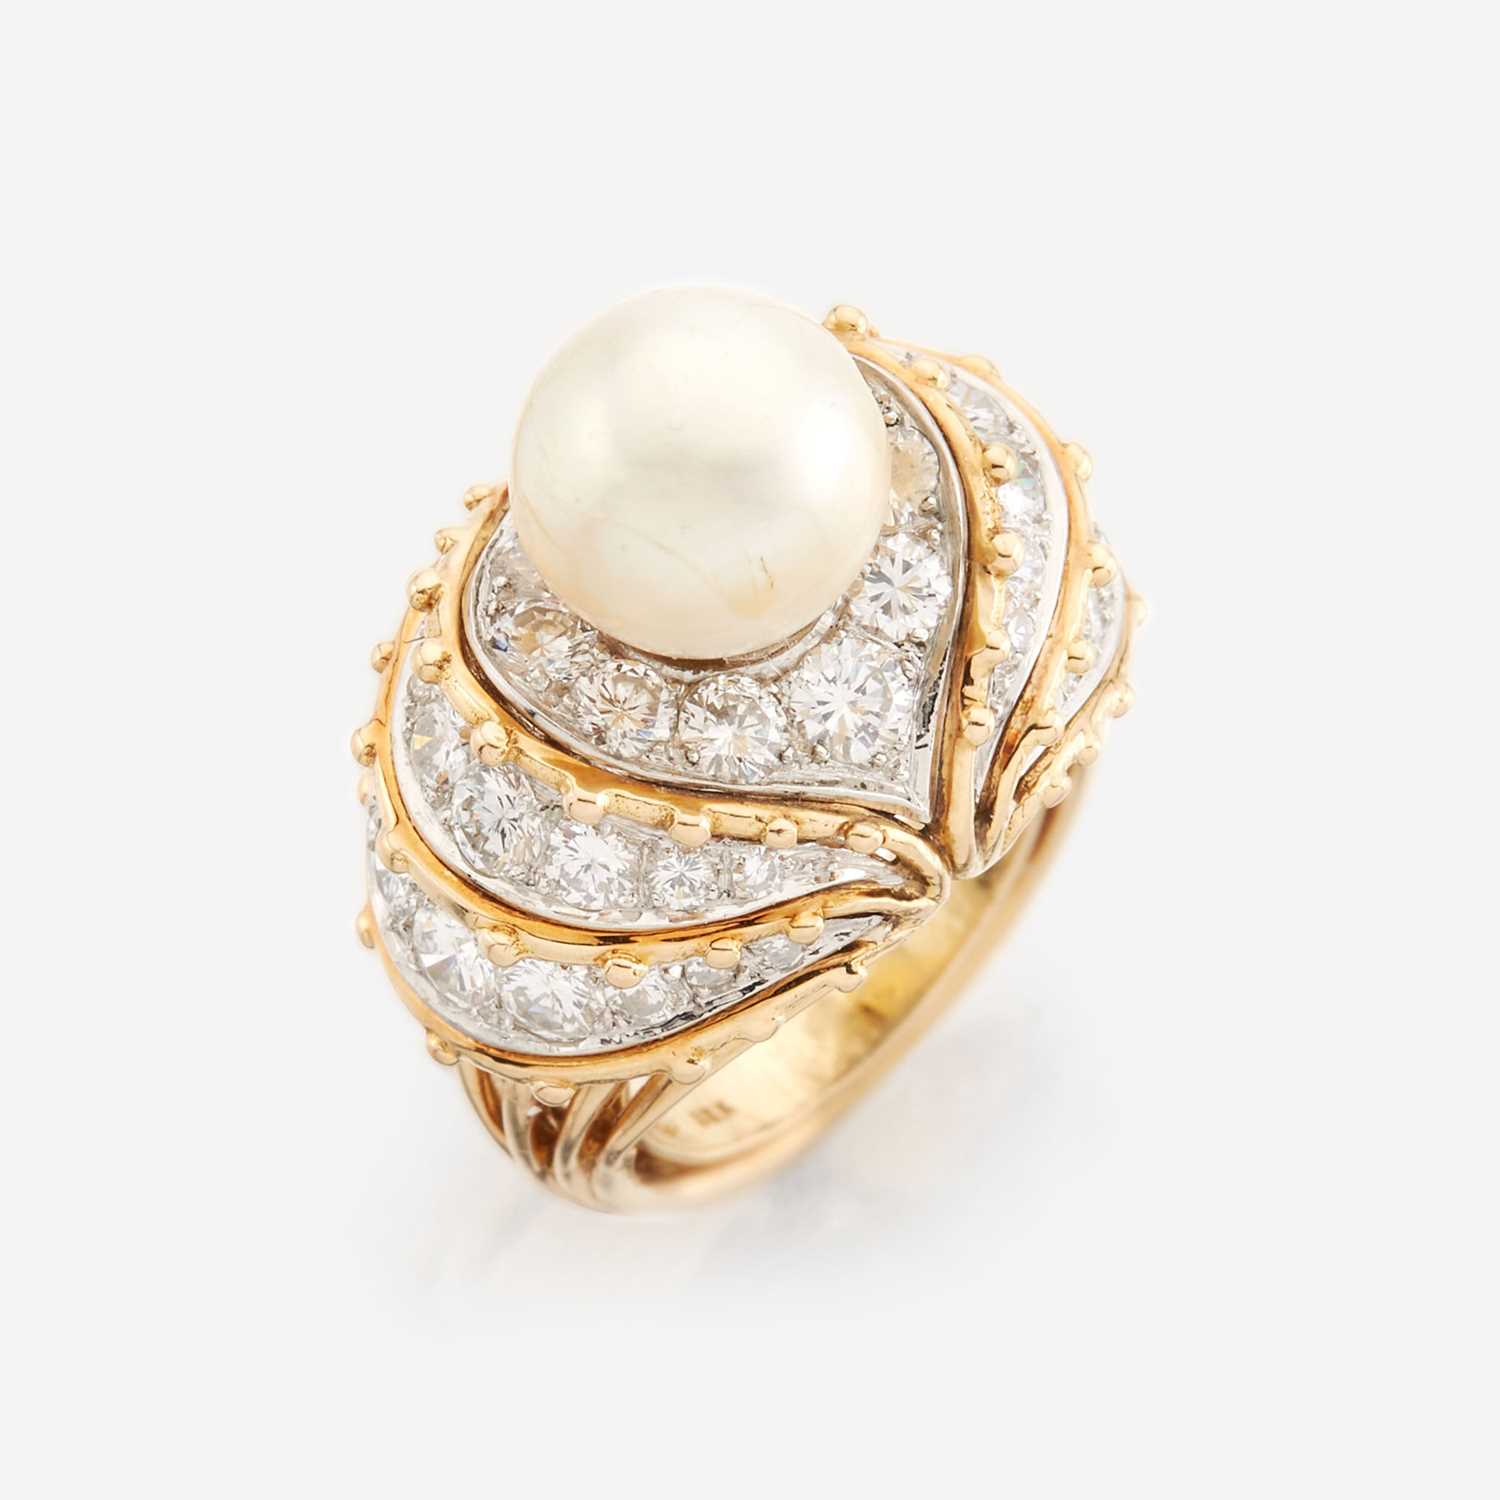 Lot 11 - A cultured pearl, diamond, gold, and platinum ring